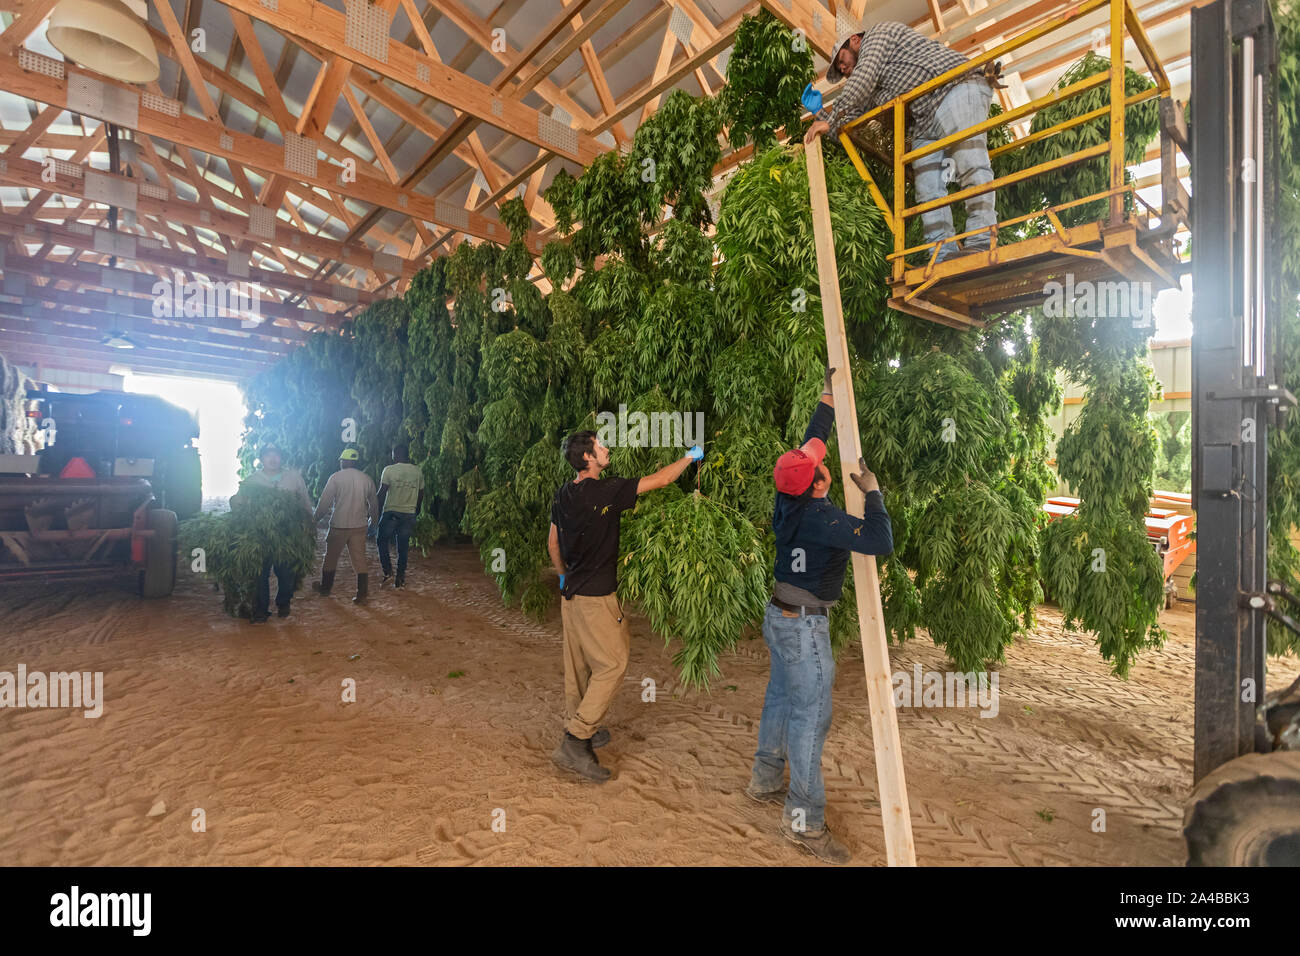 Paw Paw, Michigan - After harvesting hemp plants at the Paw Paw Hemp Company, workers hang the plants in a barn to dry. Many American farmers harveste Stock Photo